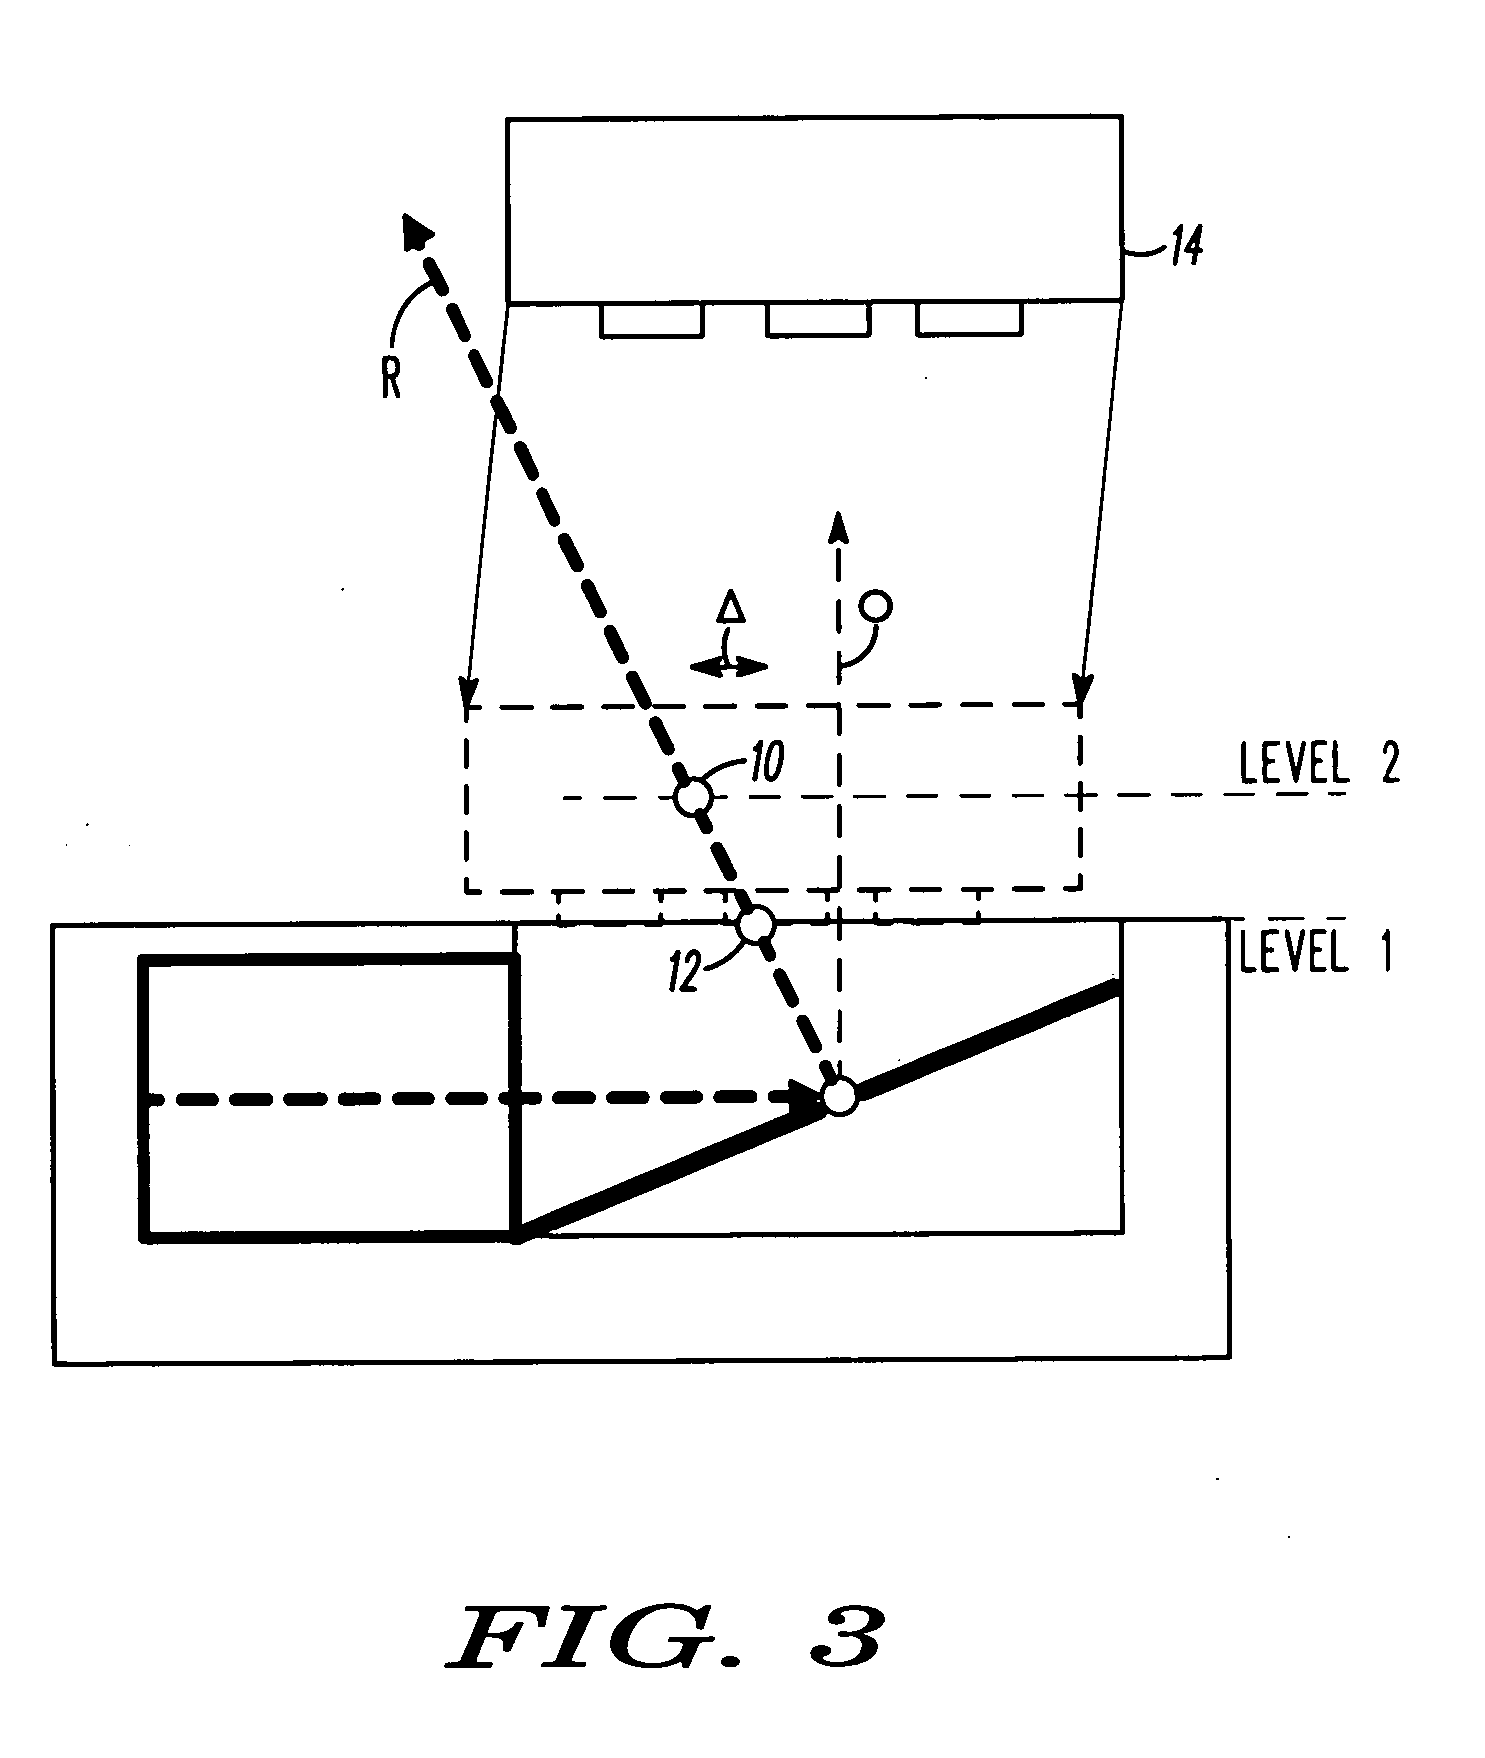 Method and arrangement for aligning an optical component on a printed wiring board